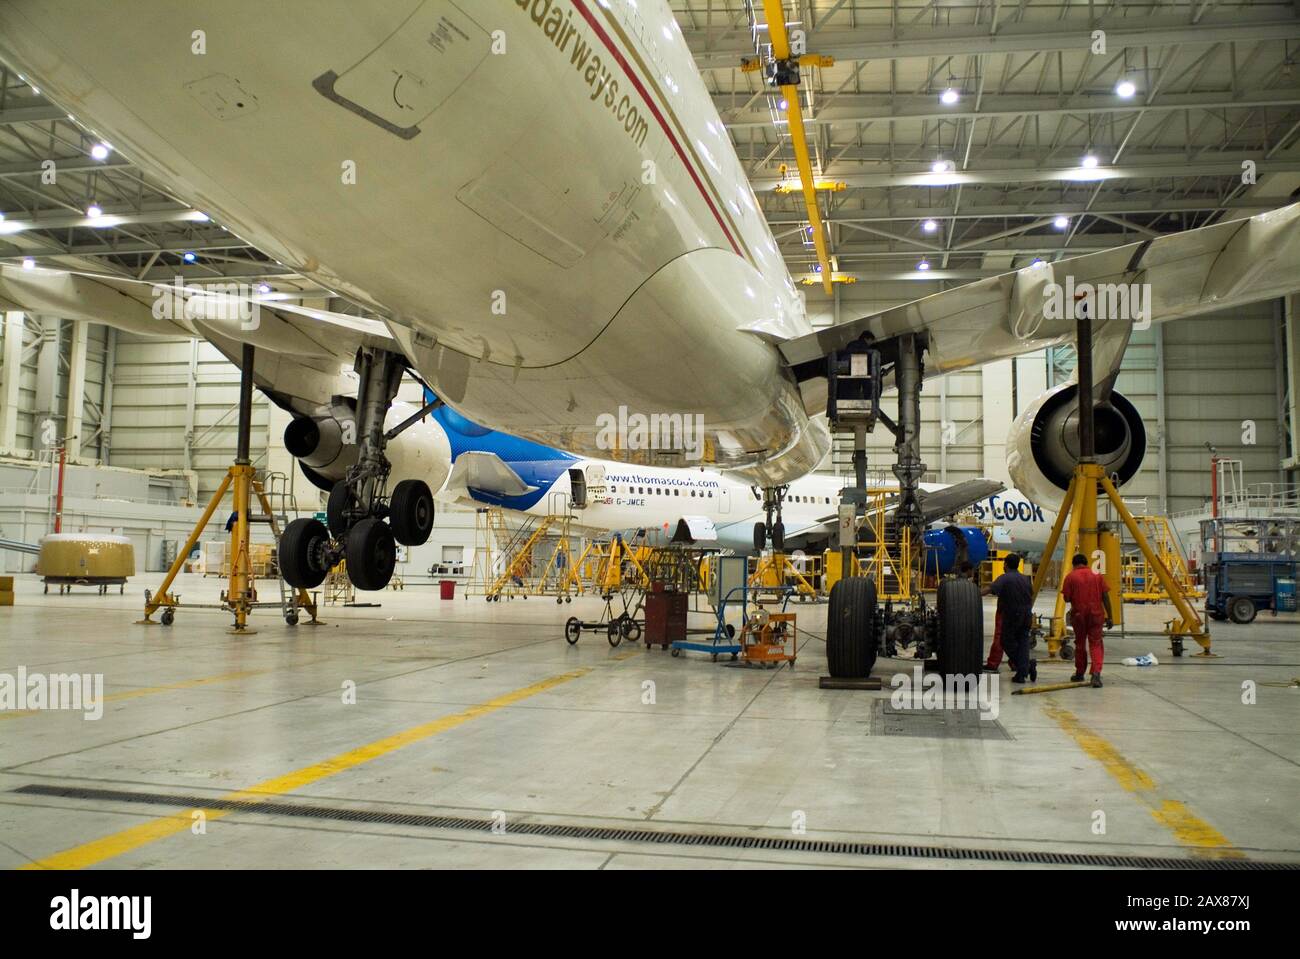 Aircraft on jacks while getting its undercarriage serviced at Abu Dhabi Airport, Abu Dhabi, UAE. Stock Photo